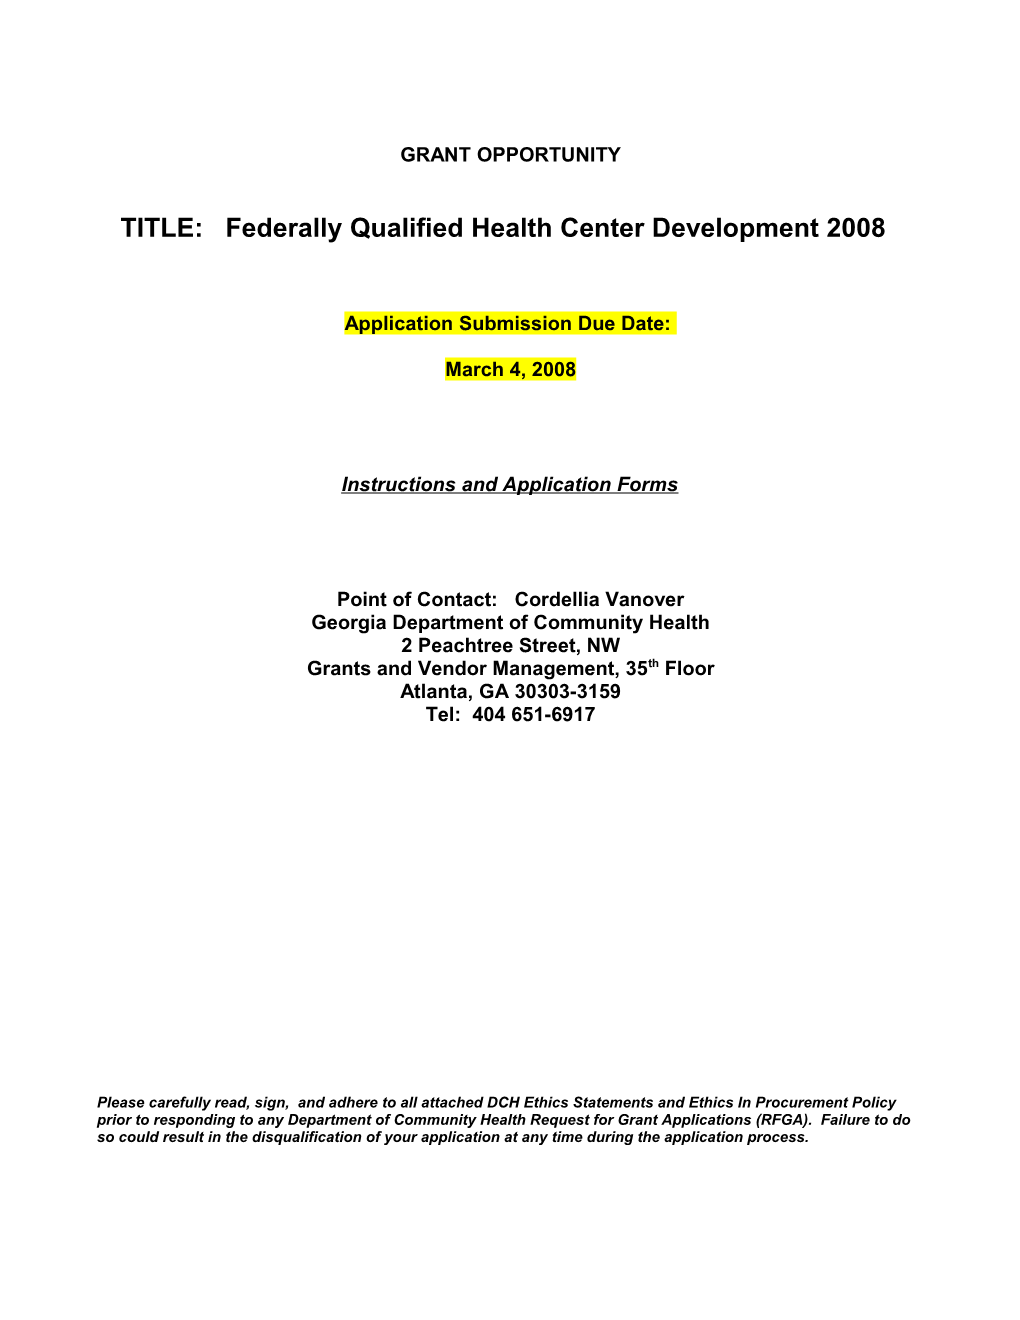 TITLE: Federally Qualified Health Center Development 2008